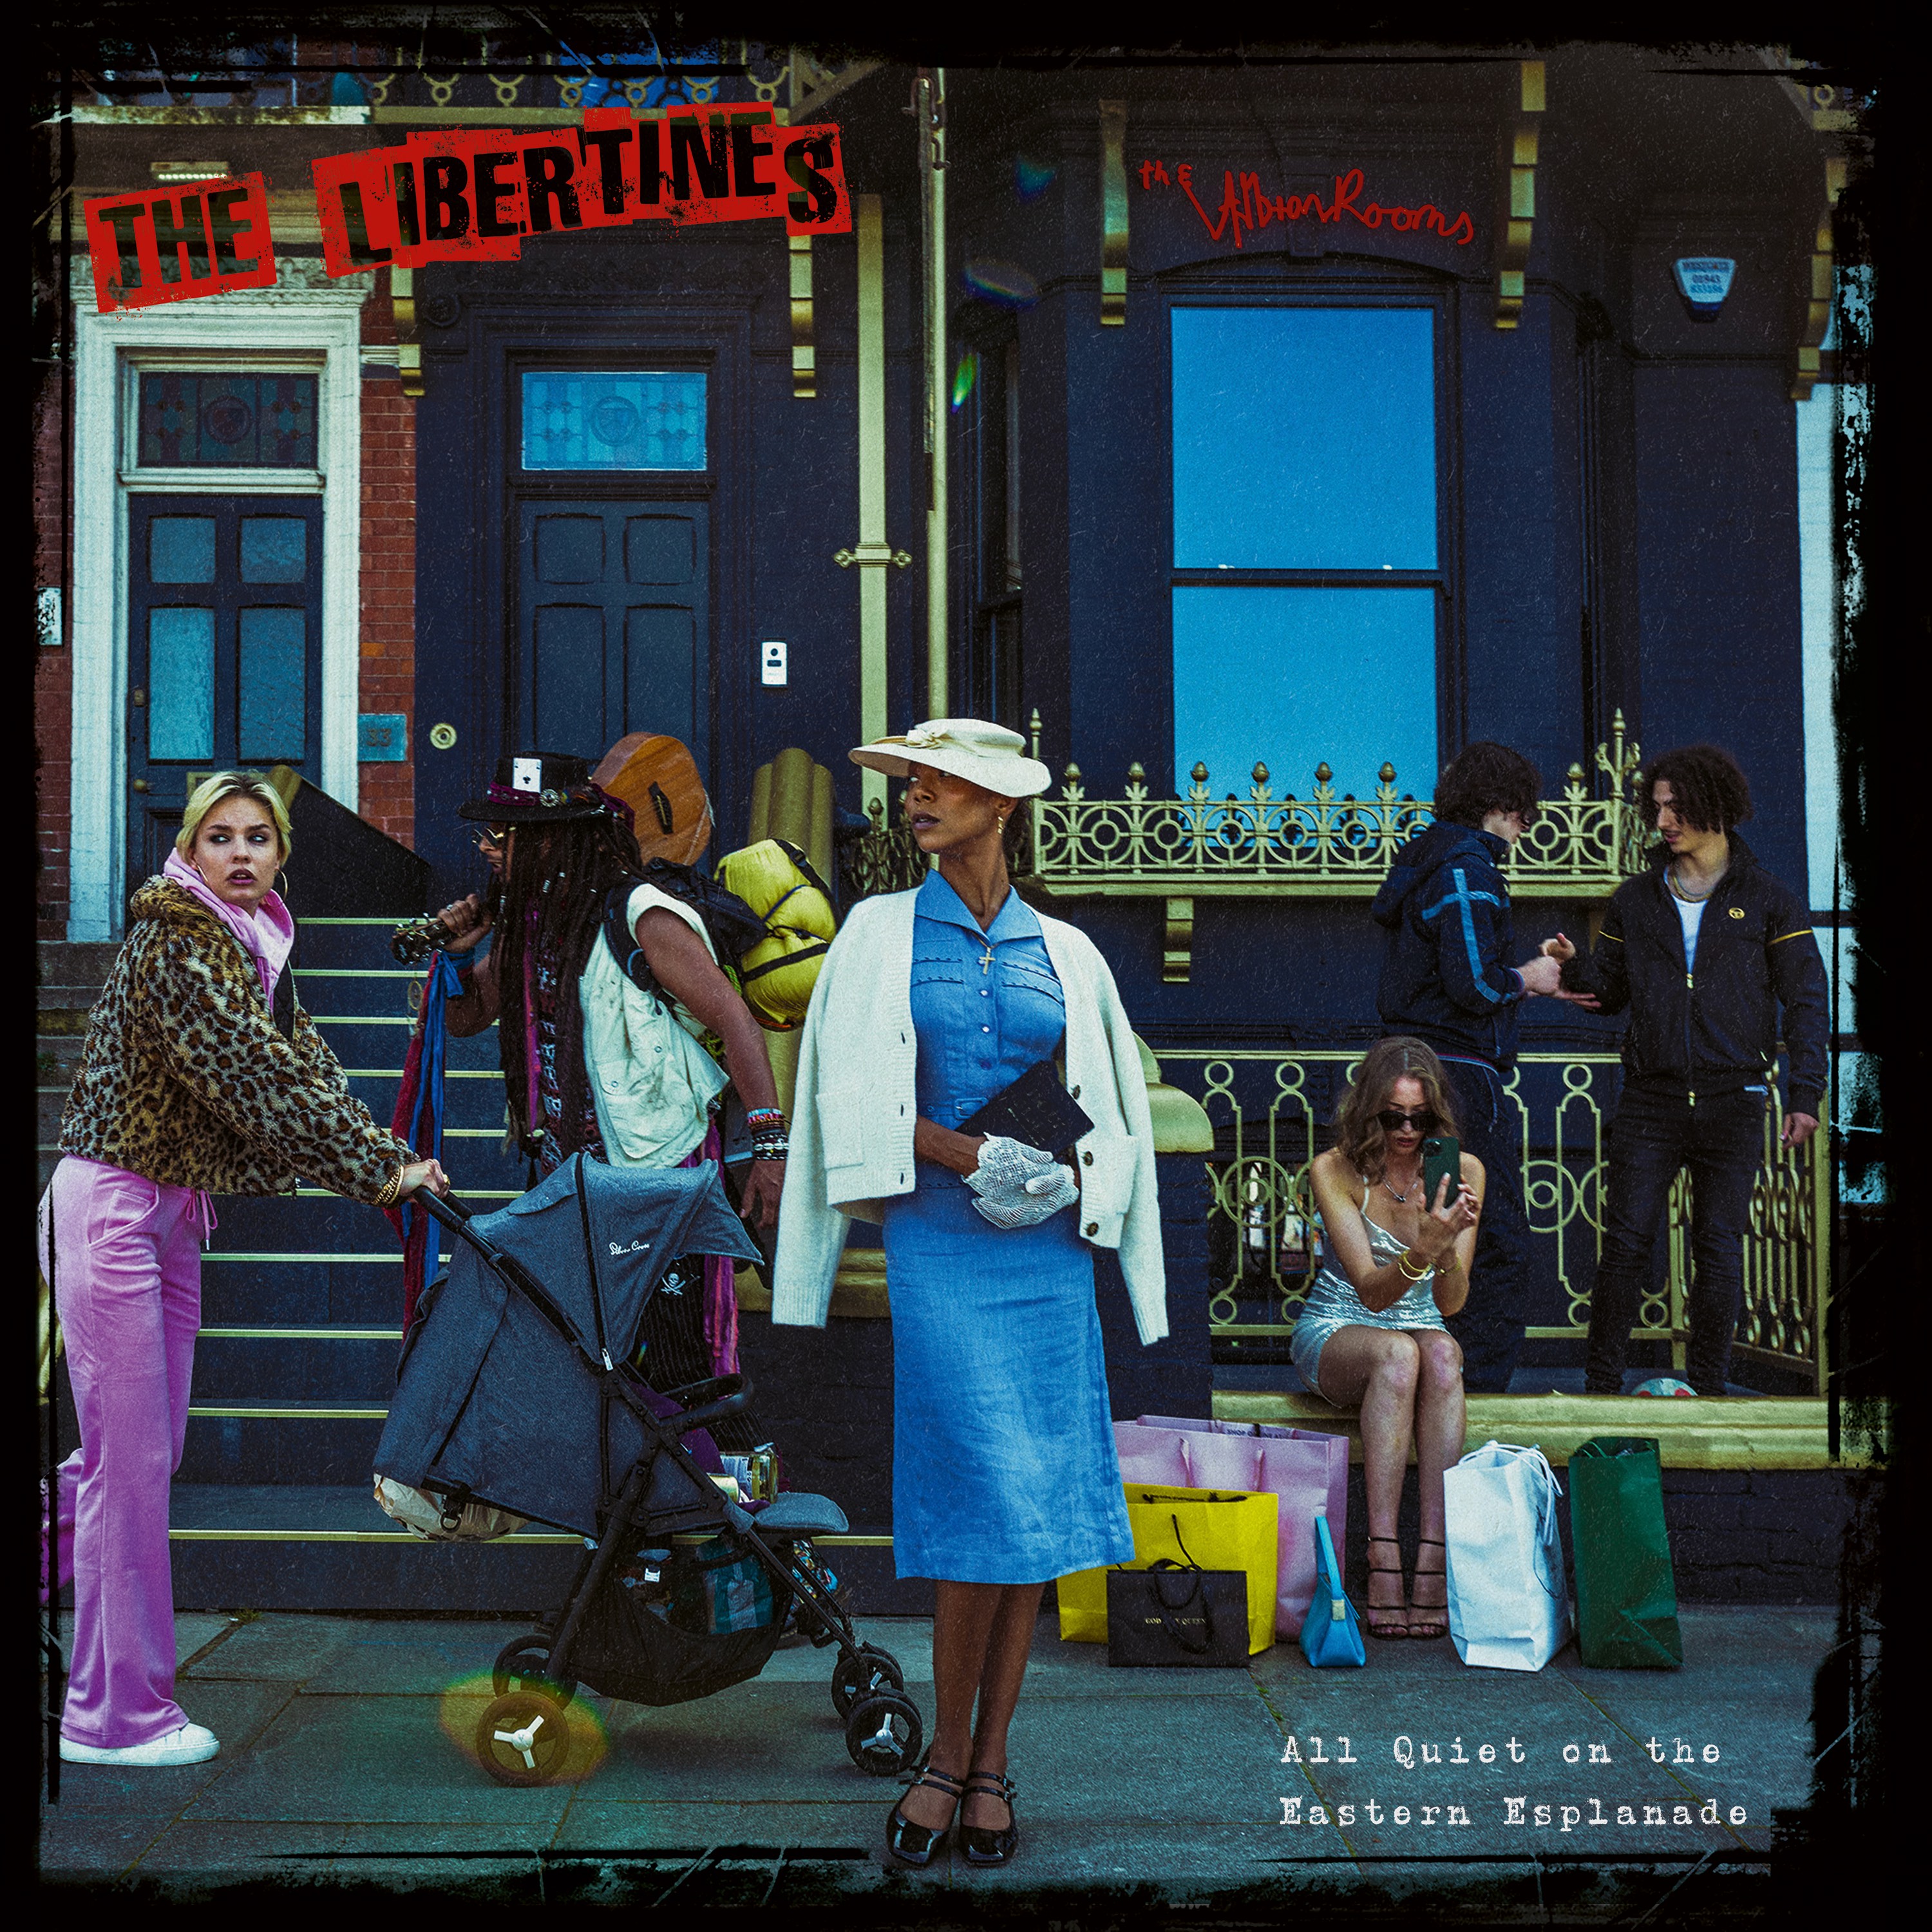 The Libertines' new album All Quiet On The Eastern Esplanade' is released on 8 March